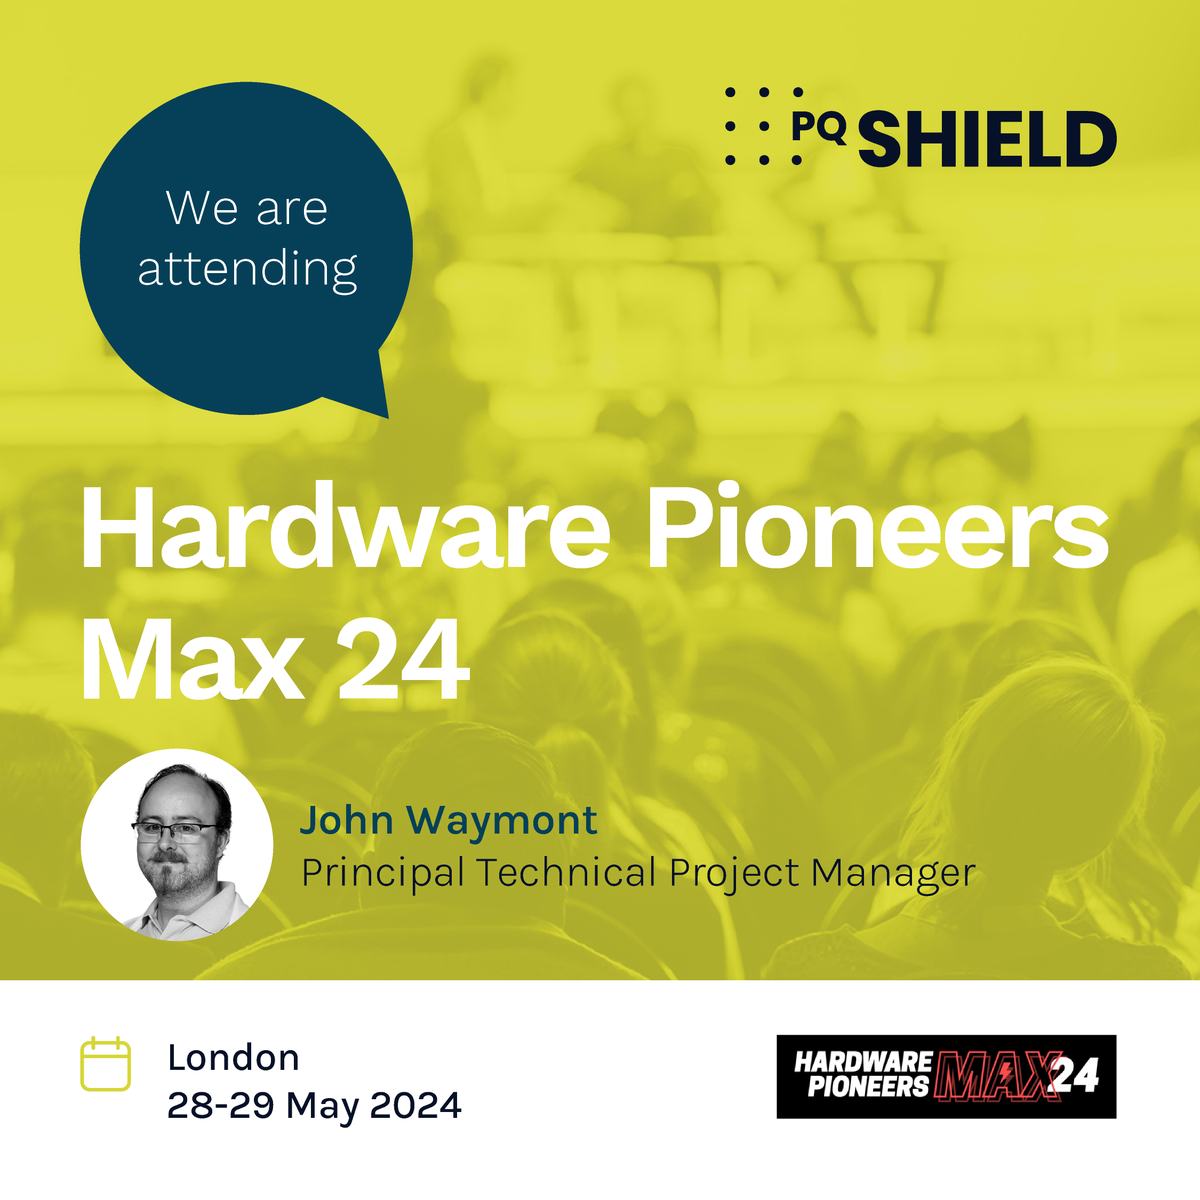 Our Principal Technical Project Manager John Waymont will be attending Hardware Pioneers Max 2024 in London on May 28th-29th. If you would like to meet with John please do get in touch. More info on the event can be found here: hubs.li/Q02yd5c00